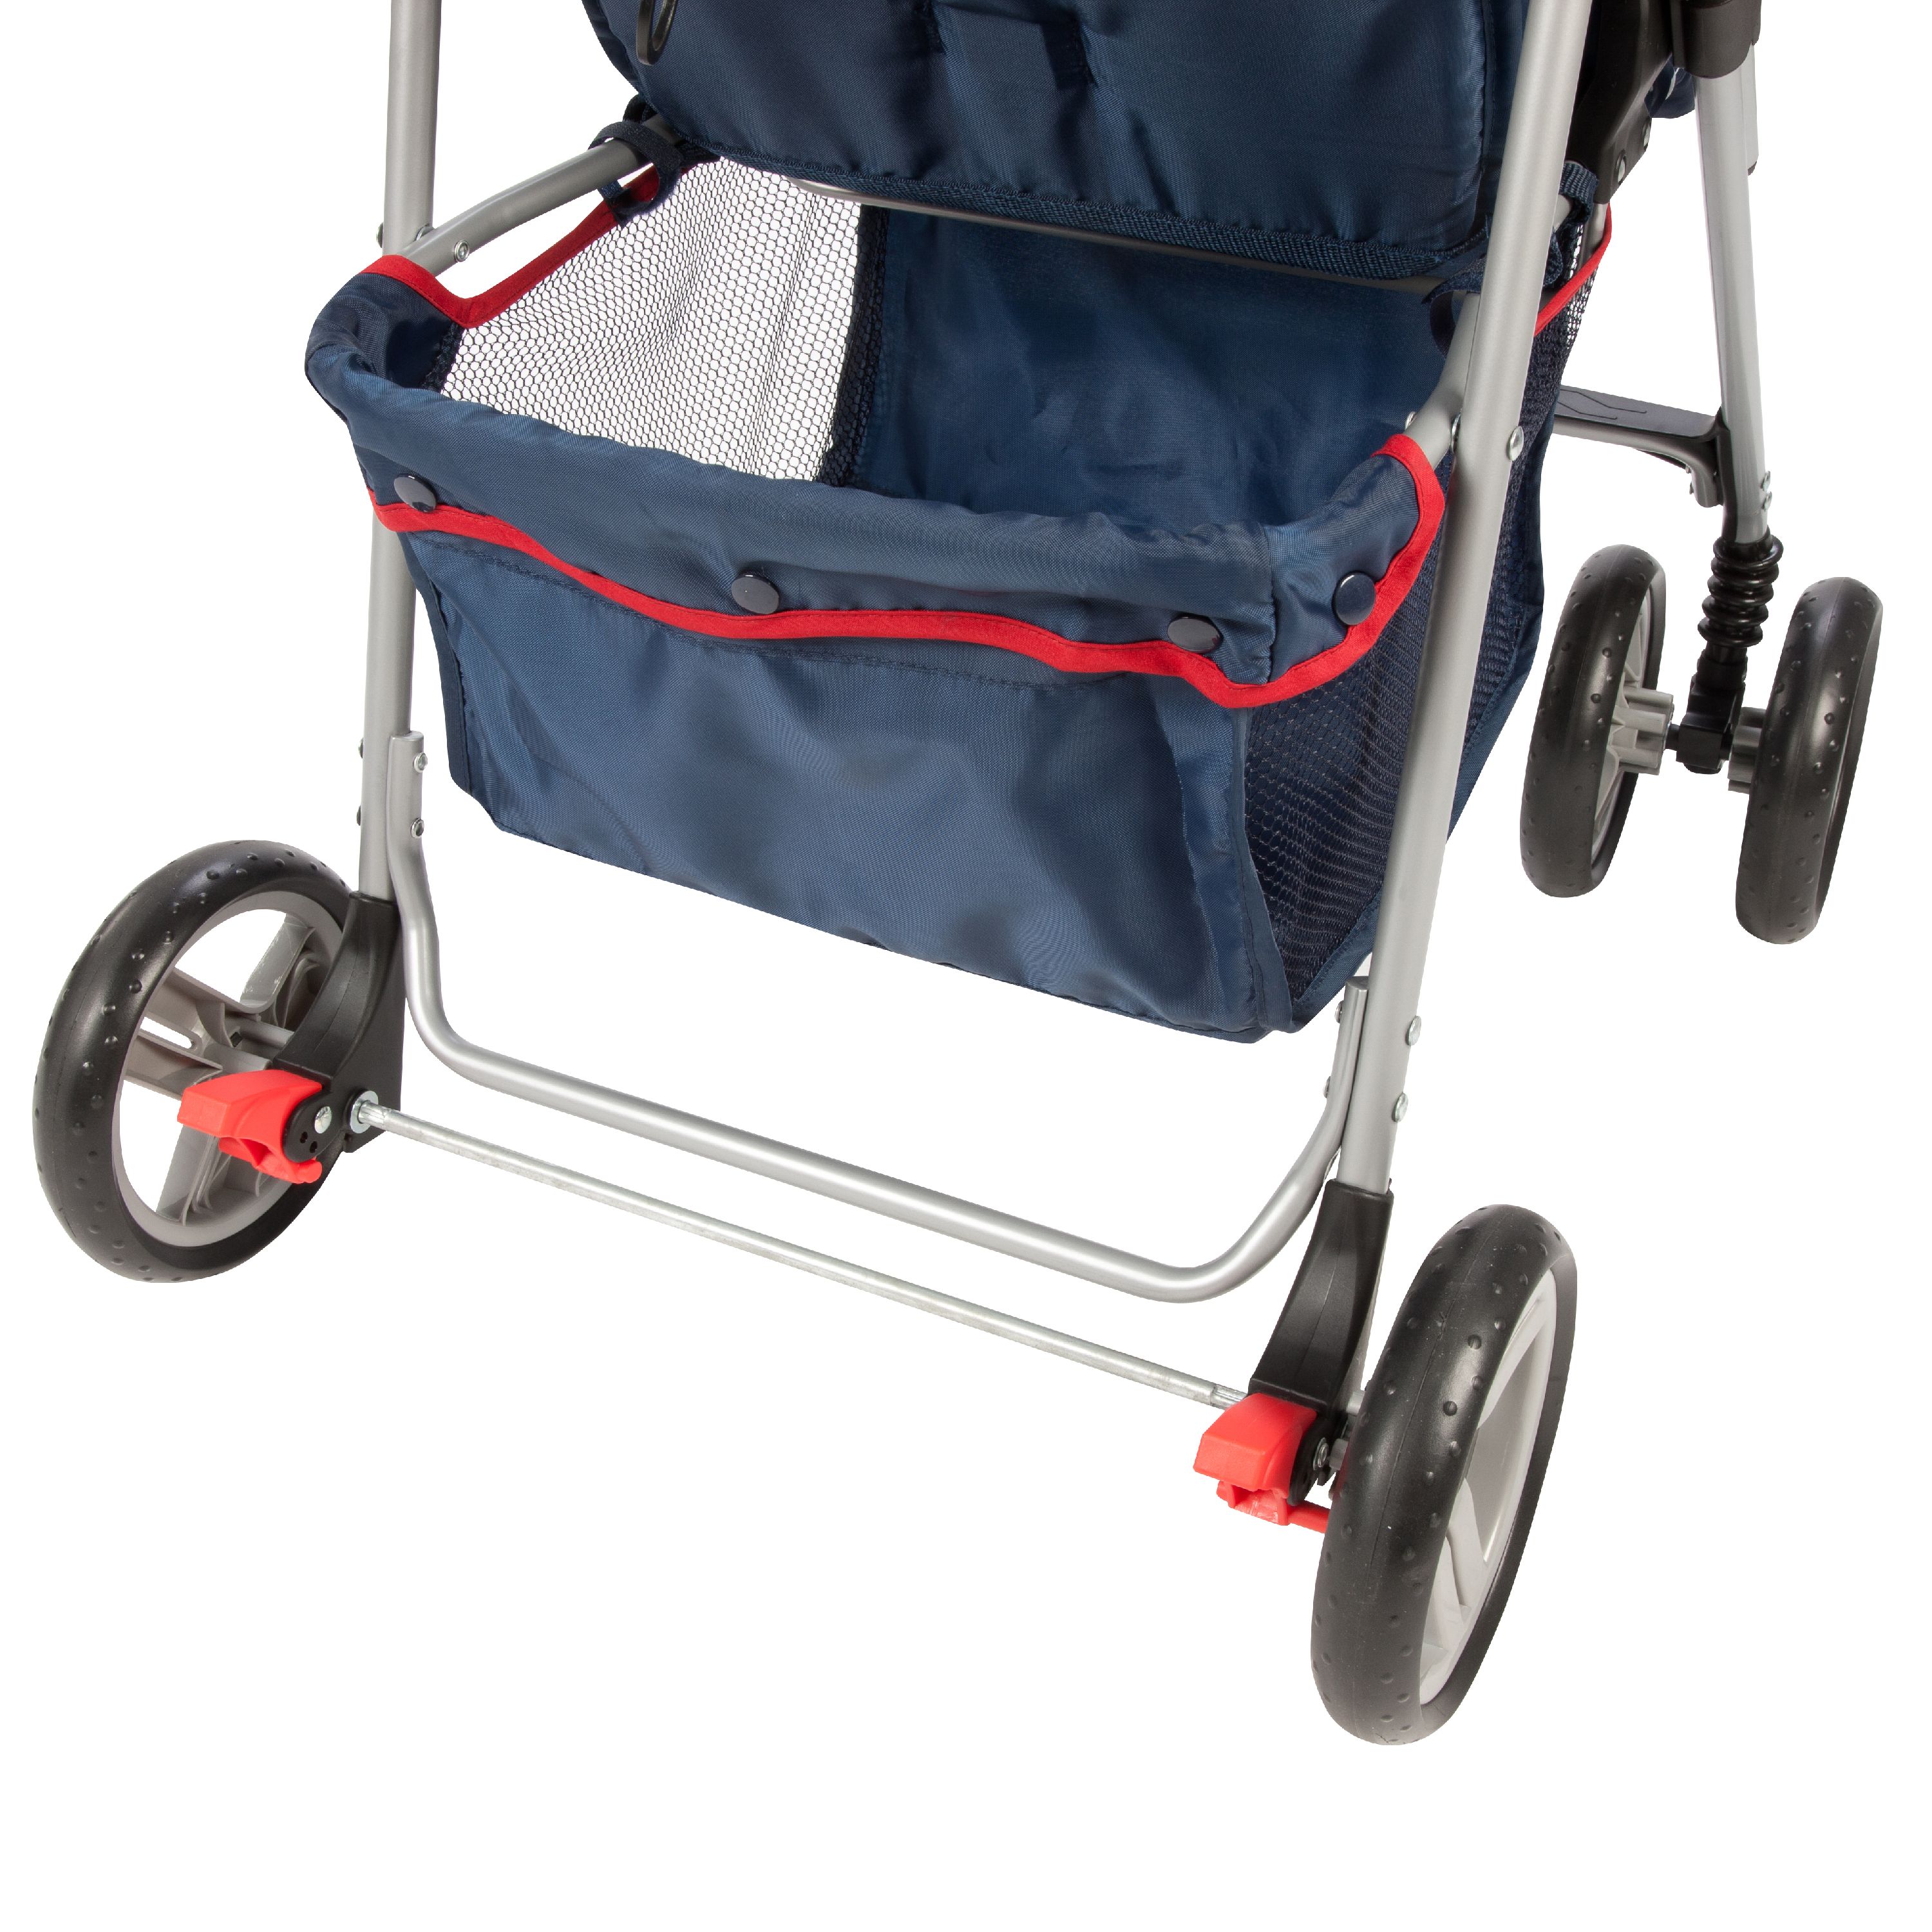 Cosco Commuter Compact Travel System - image 2 of 6